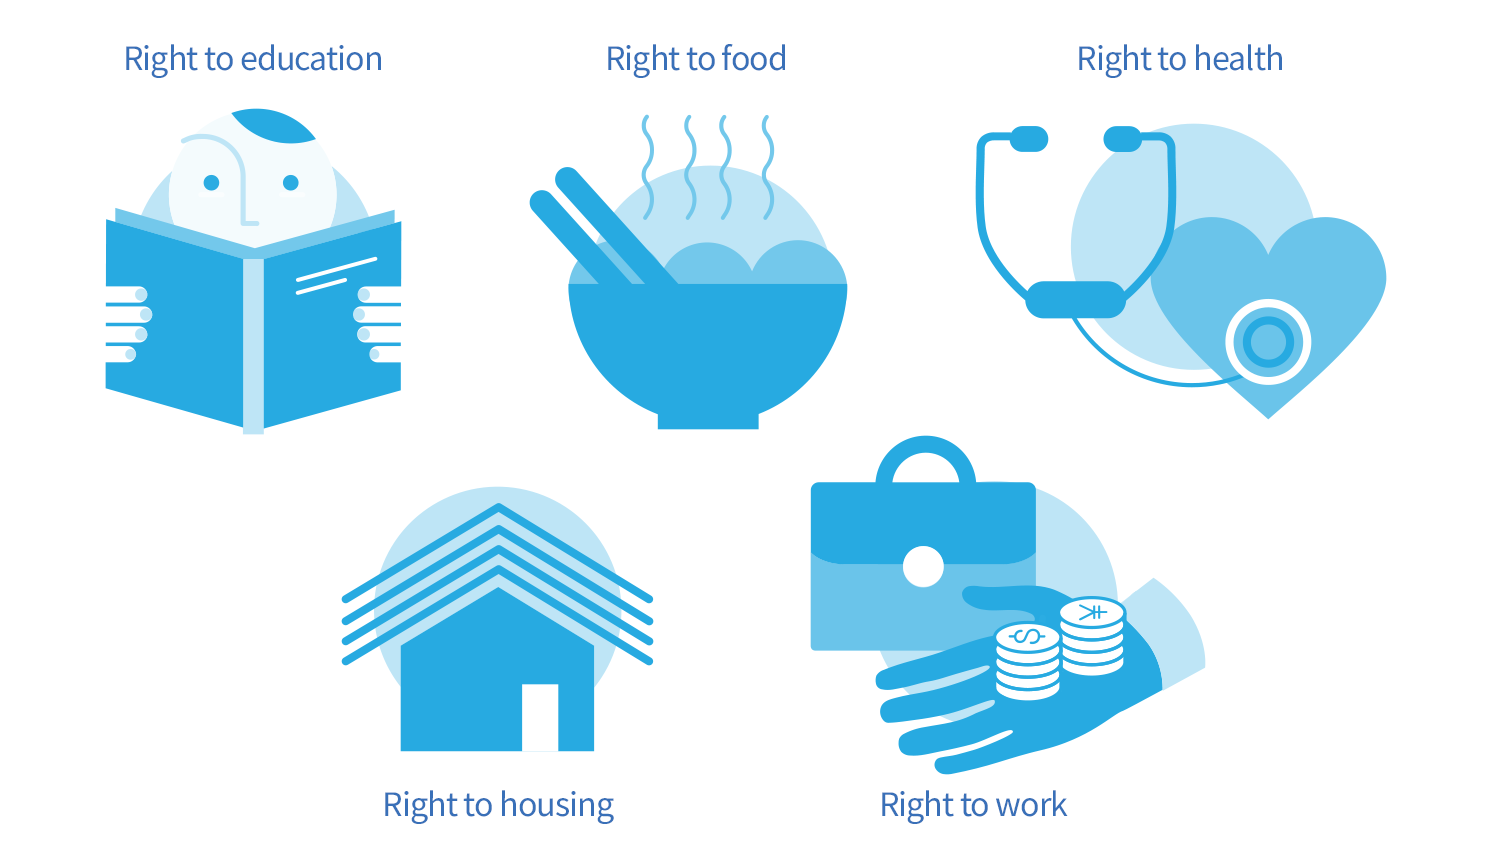 Illustrations of the rights to education, food, health, housing and work.